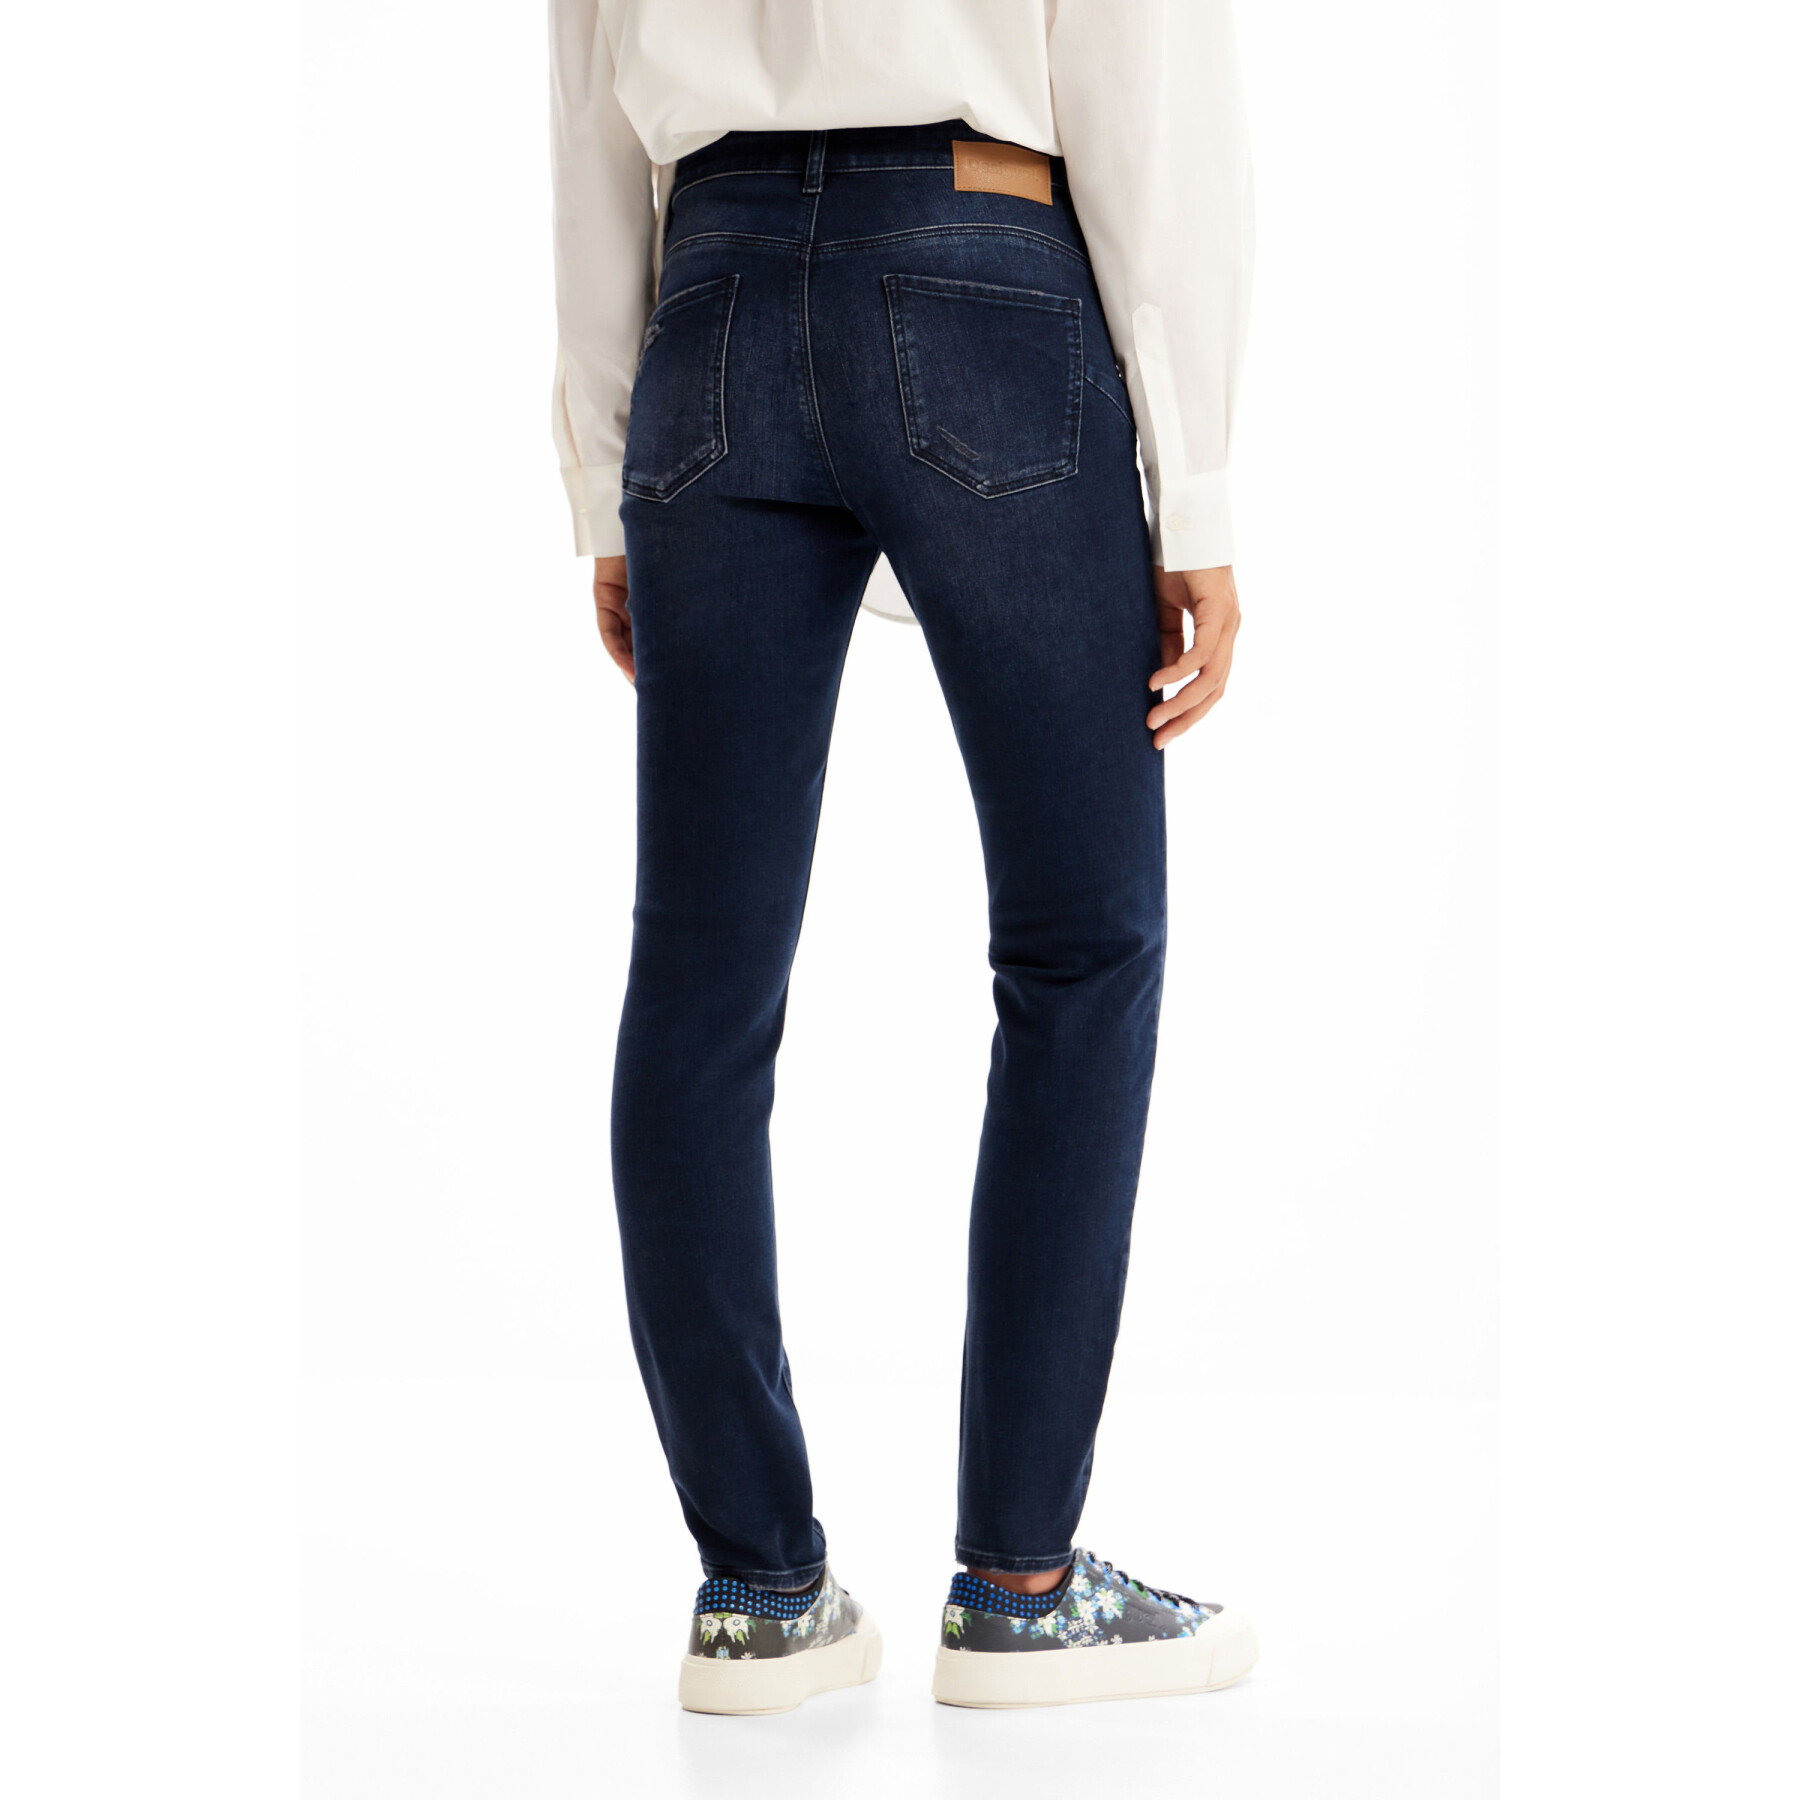 Women's embroidered skinny jeans Desigual Push-up